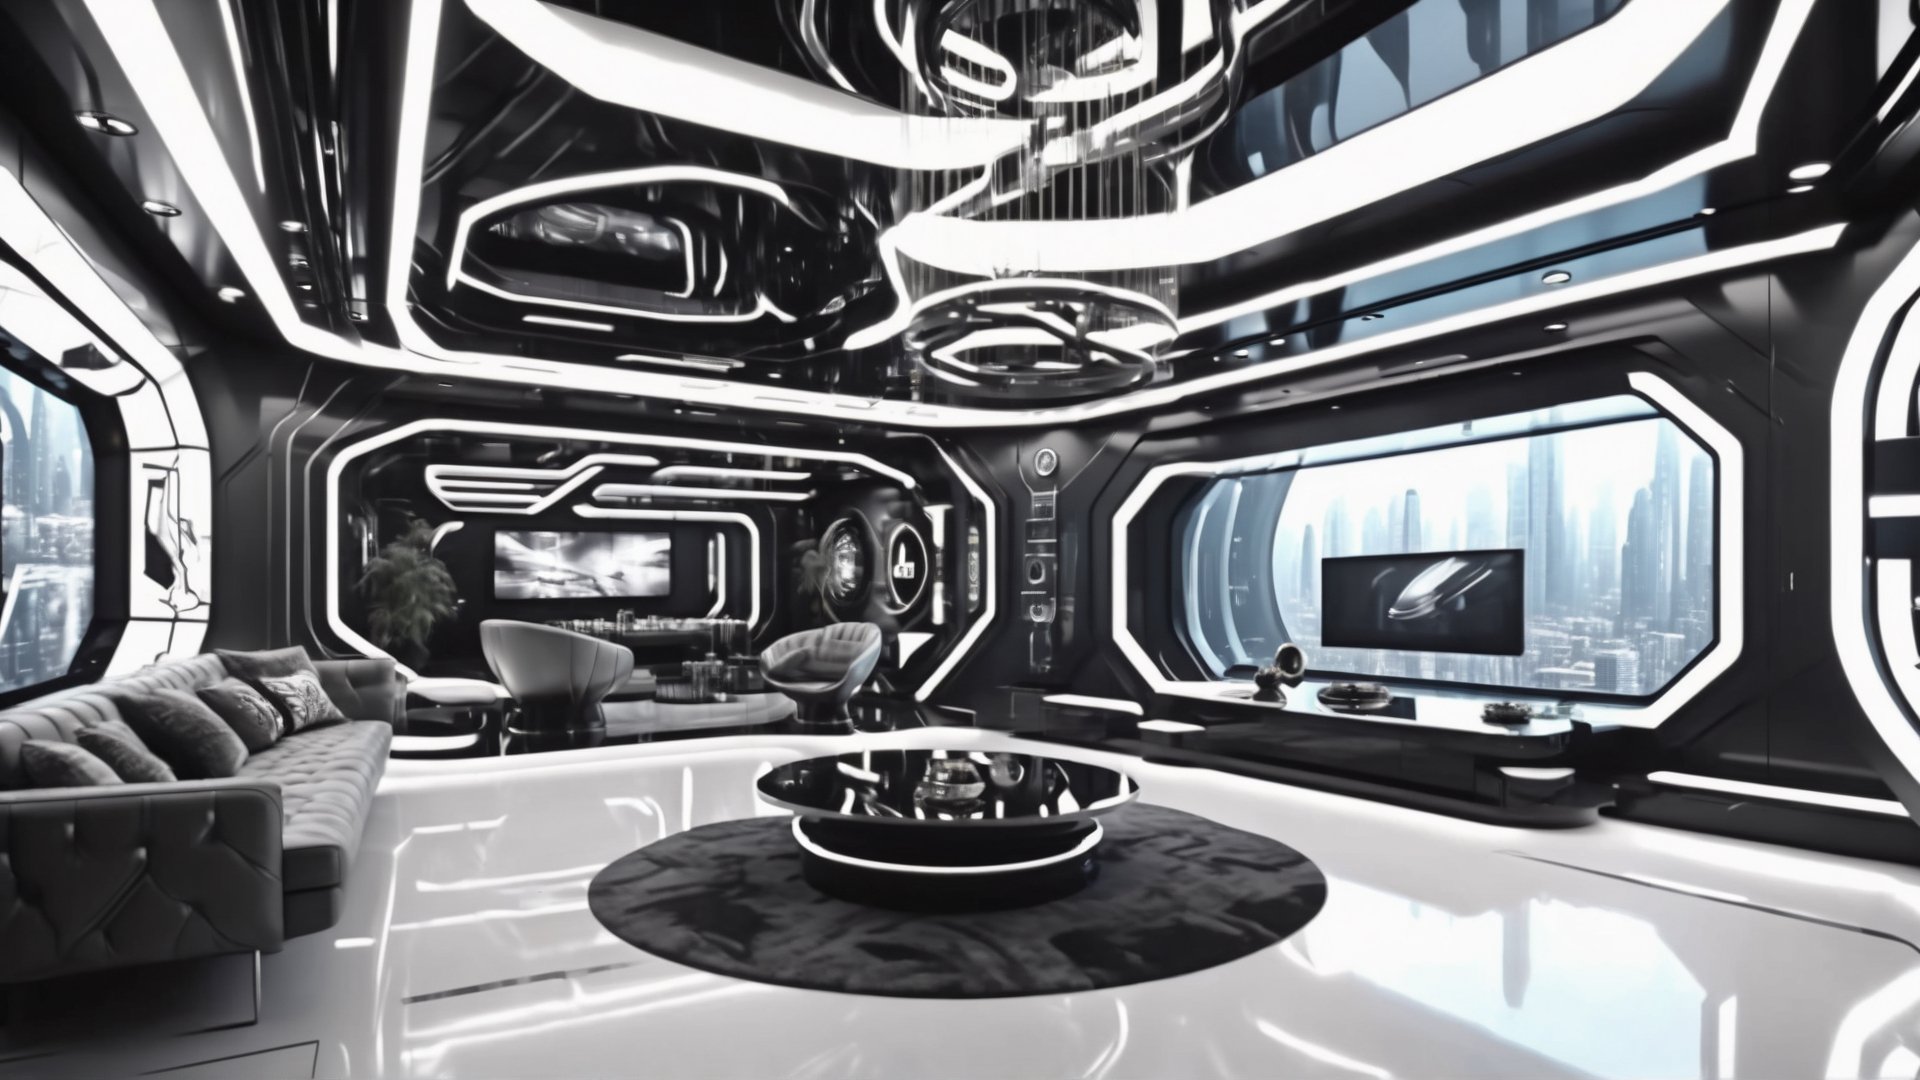 Masterpiece, ultra high definition, ultra high quality, 8k, exquisite details,
Space station, oversized floor-to-ceiling windows, future technology, intricate light, future luxury furniture, cyberpunk, black and white gray decoration tones, outer space background, planets, galaxies,